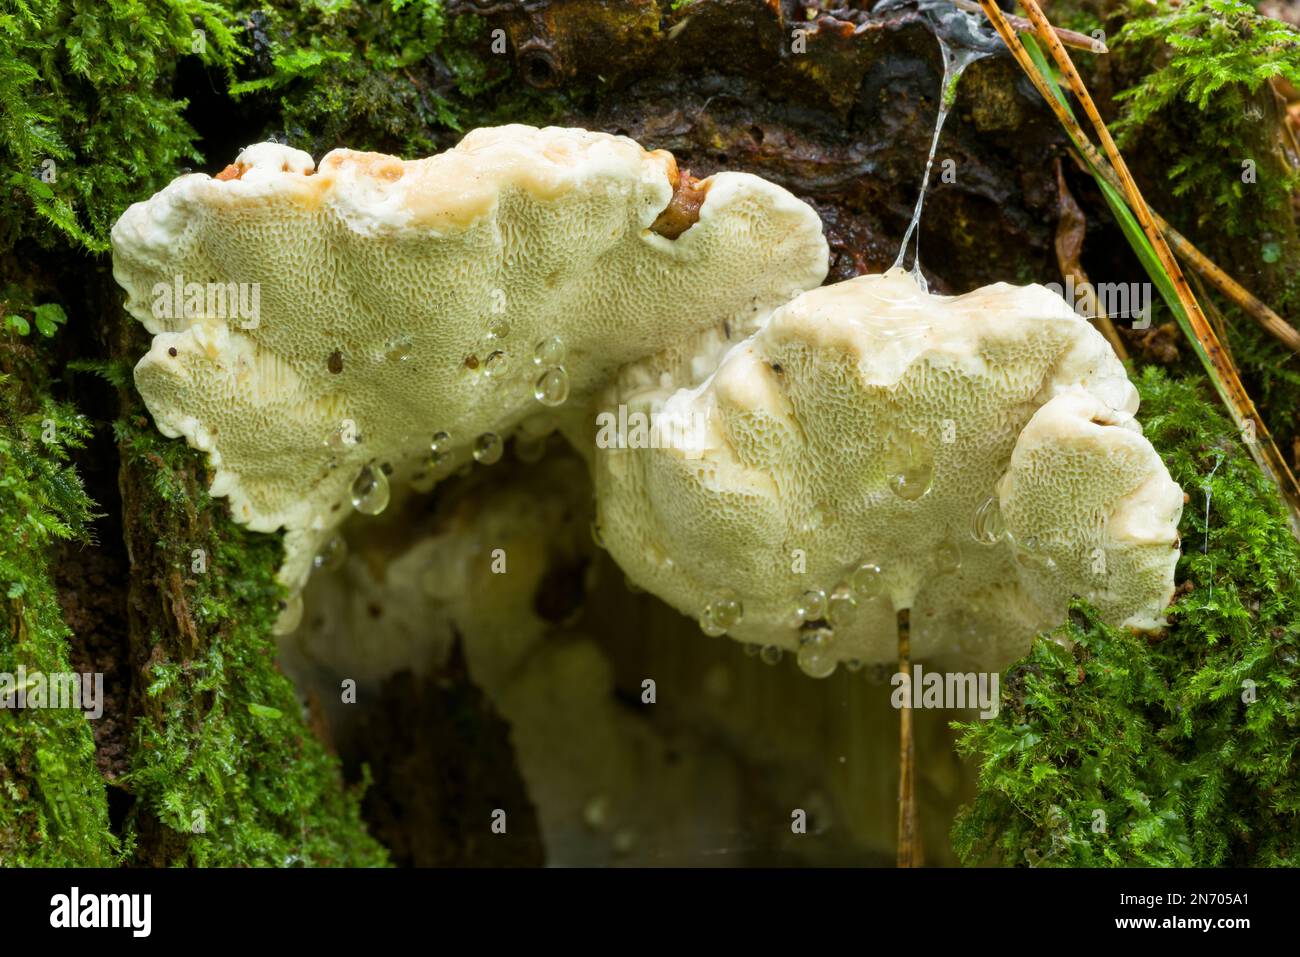 The fruiting body of Root Rot fungus (Heterobasidion annosum) growing on the side of an old tree stump in a mixed woodland in North Somerset, England. Stock Photo